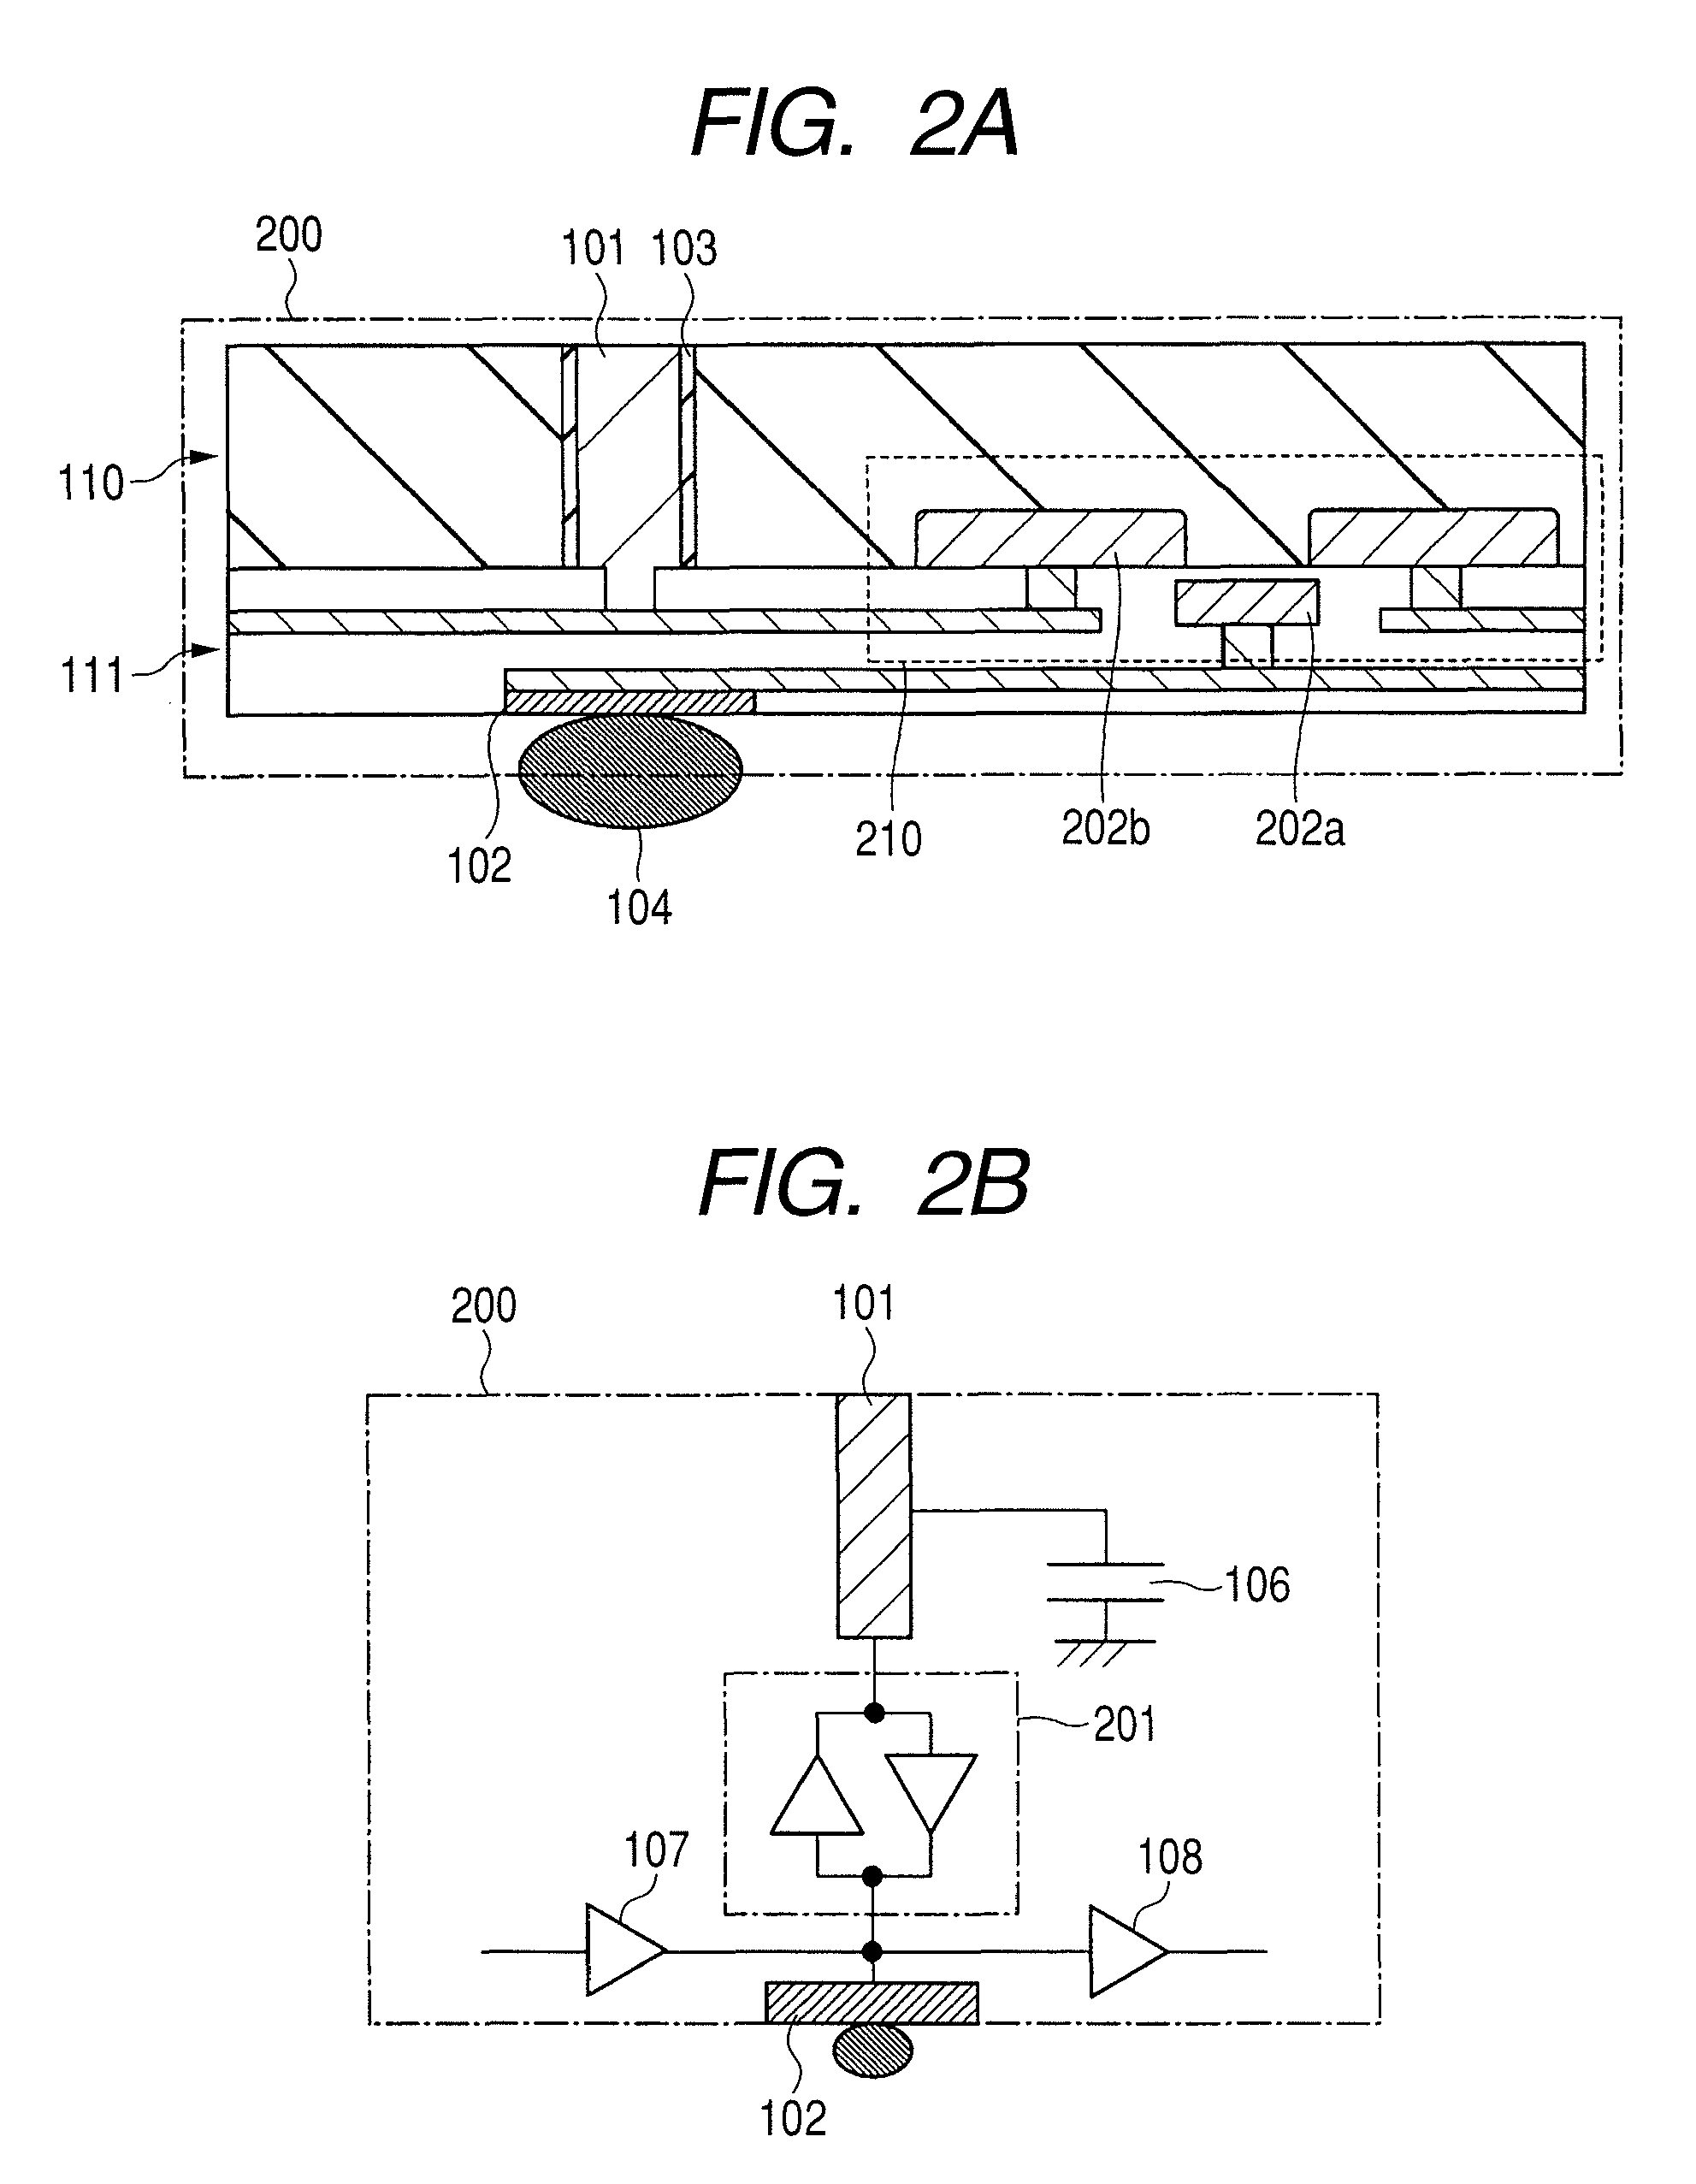 Semiconductor integrated circuit device comprising a plurality of semiconductor chips mounted to stack for transmitting a signal between the semiconductor chips